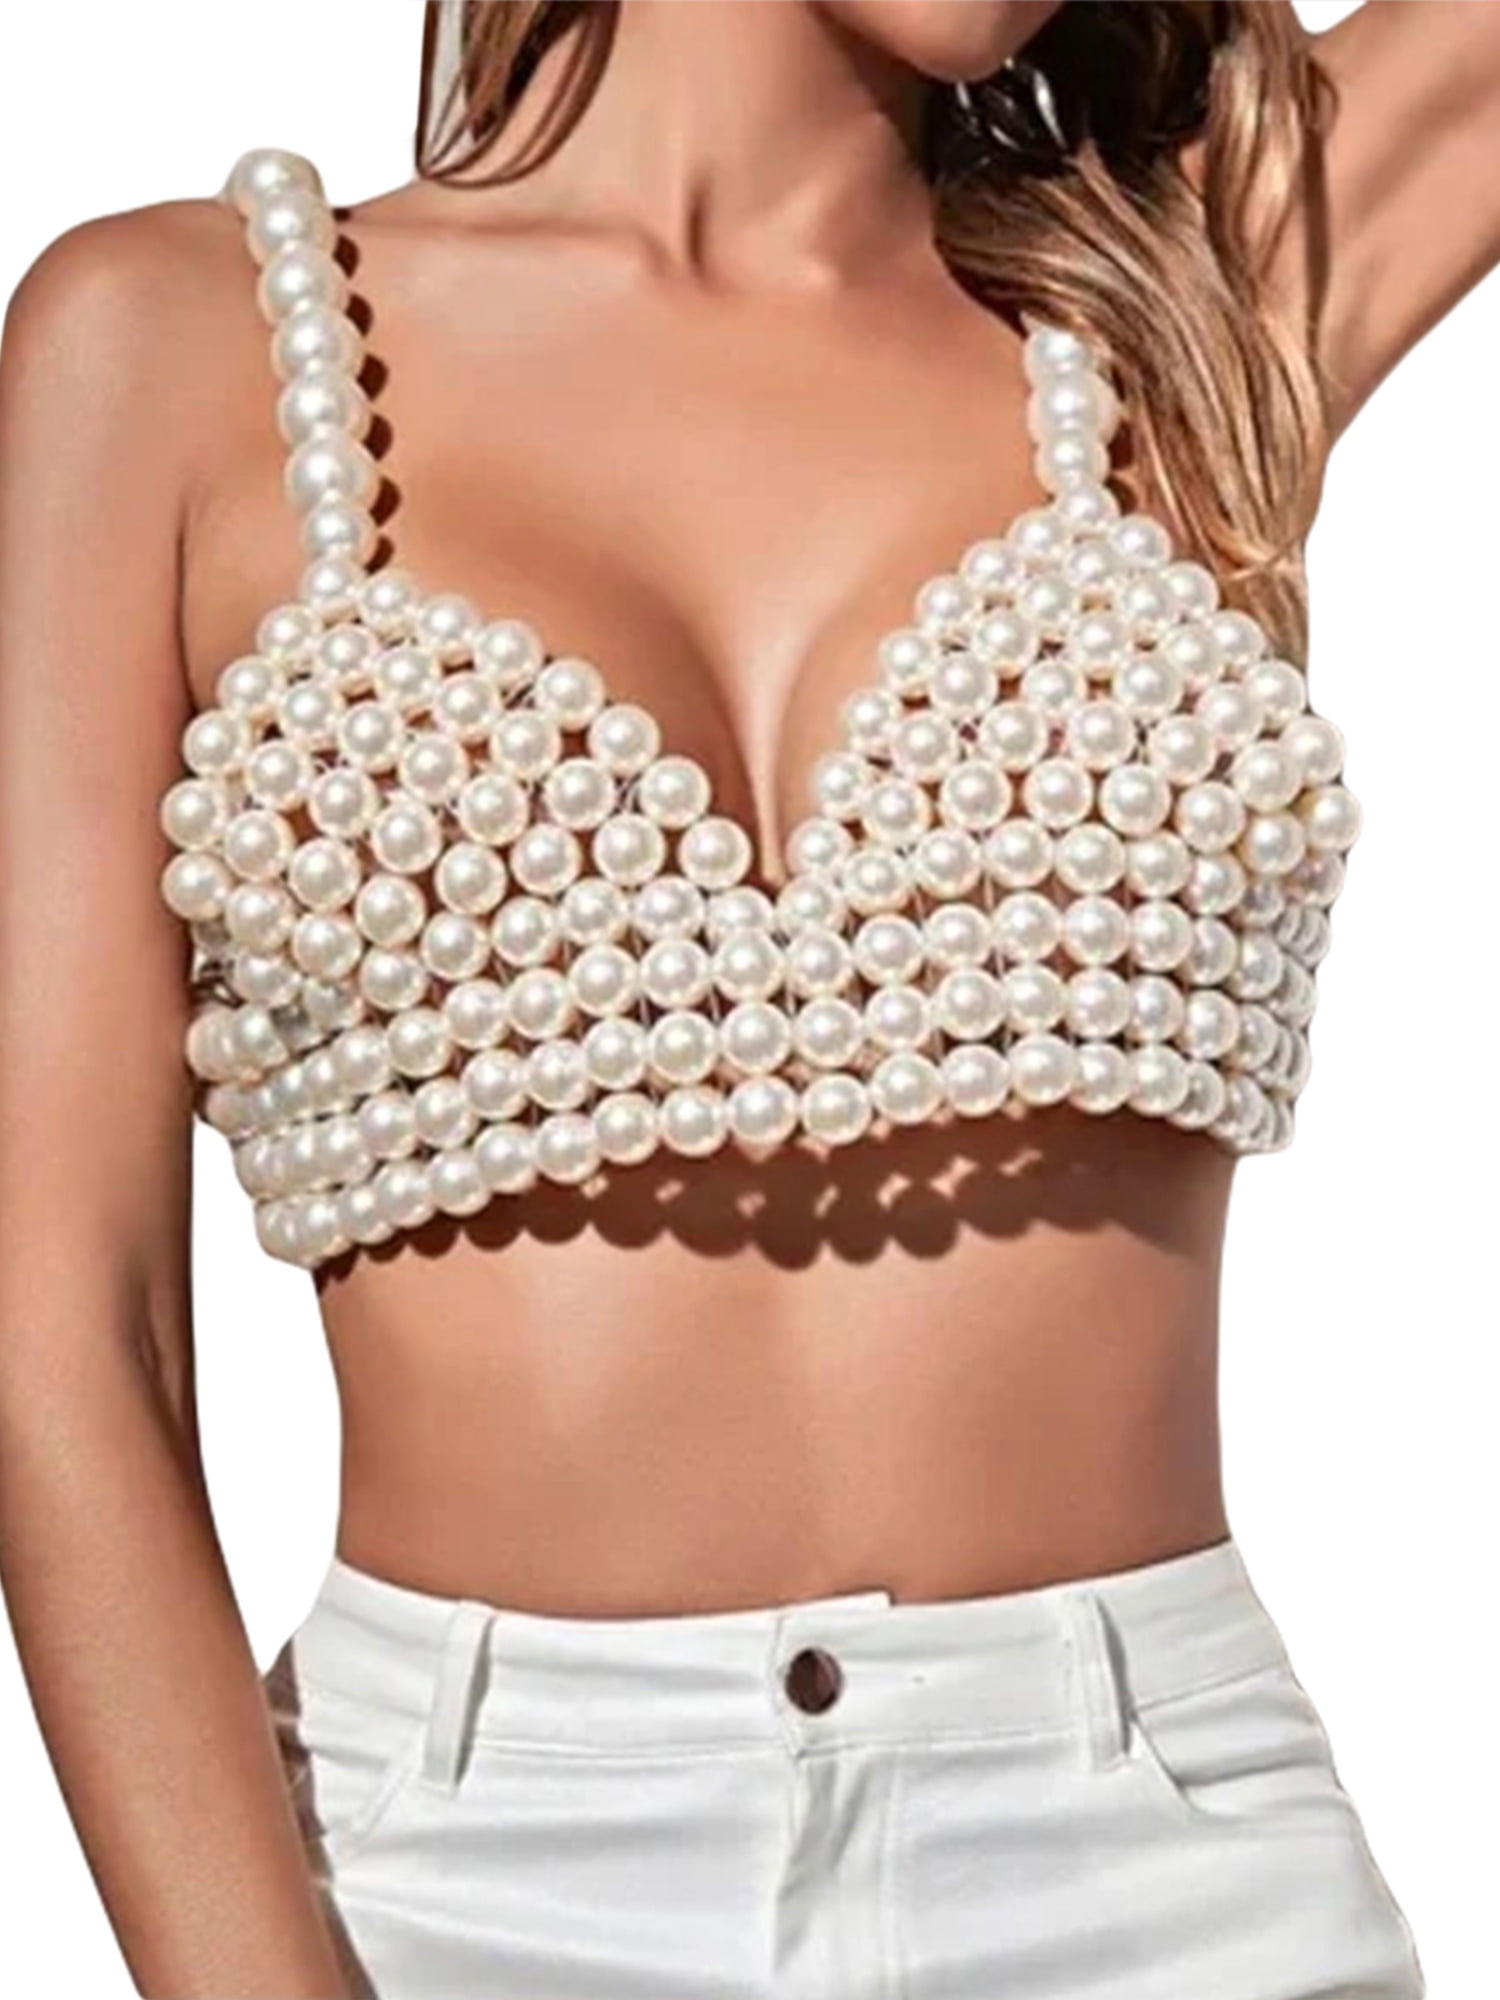 Cheap INS Handmade Imitation Pearls Bow Tie Sexy Body Necklace Chest Chain  Body Jewlery for Women Luxury Pearls Top Bra Breast Chain